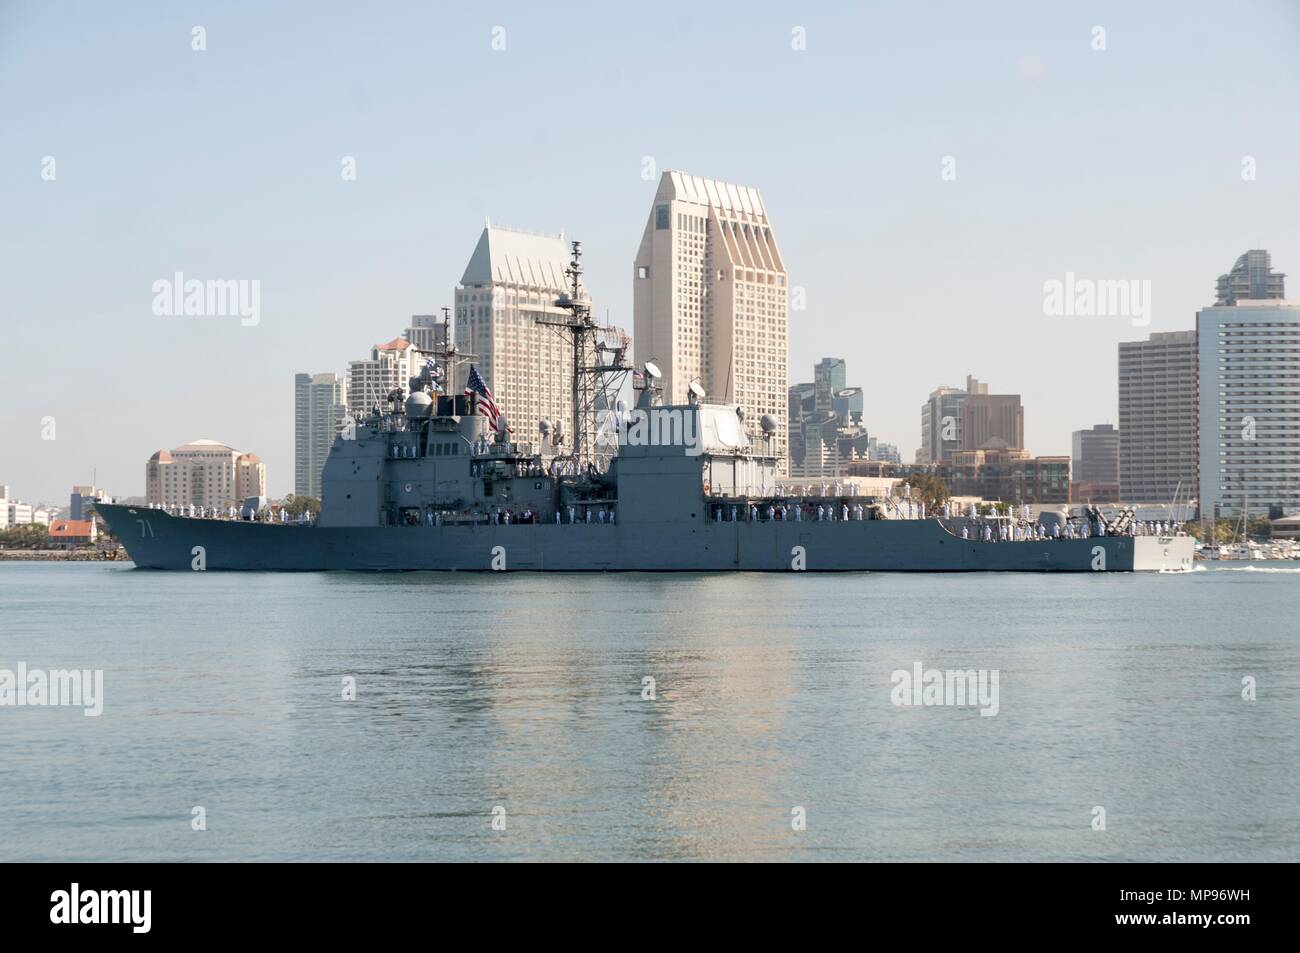 The U.S. Navy Ticonderoga-class guided-missile cruiser USS Cape St. George transits through the San Diego Bay June 16, 2014 in San Diego, California.   (photo by Donnie W. Ryan via Planetpix) Stock Photo